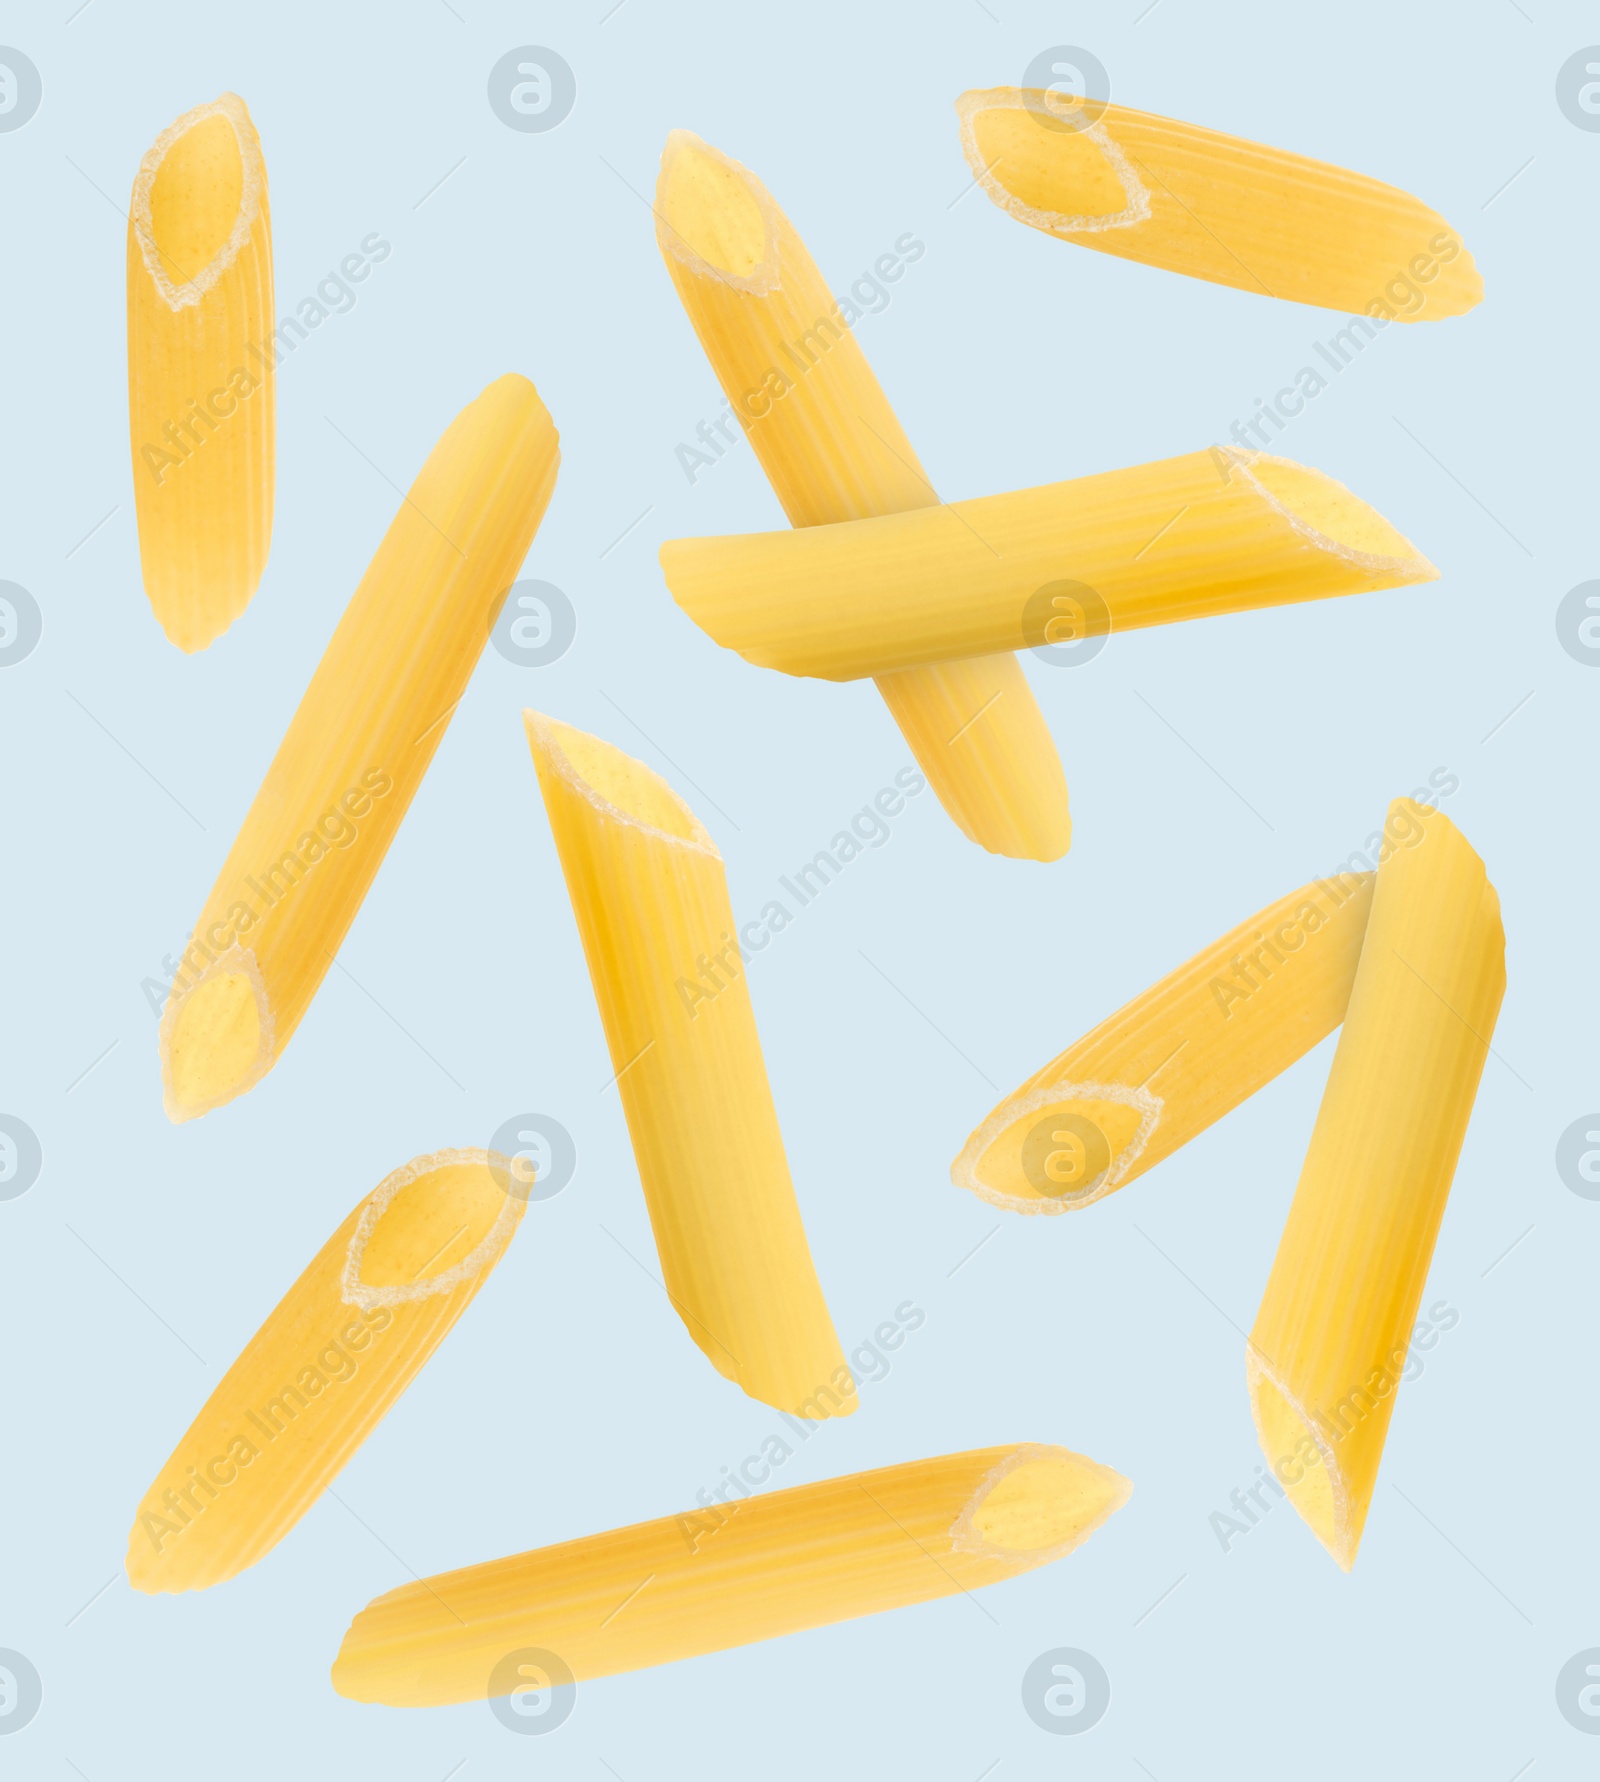 Image of Raw penne pasta flying on light blue background